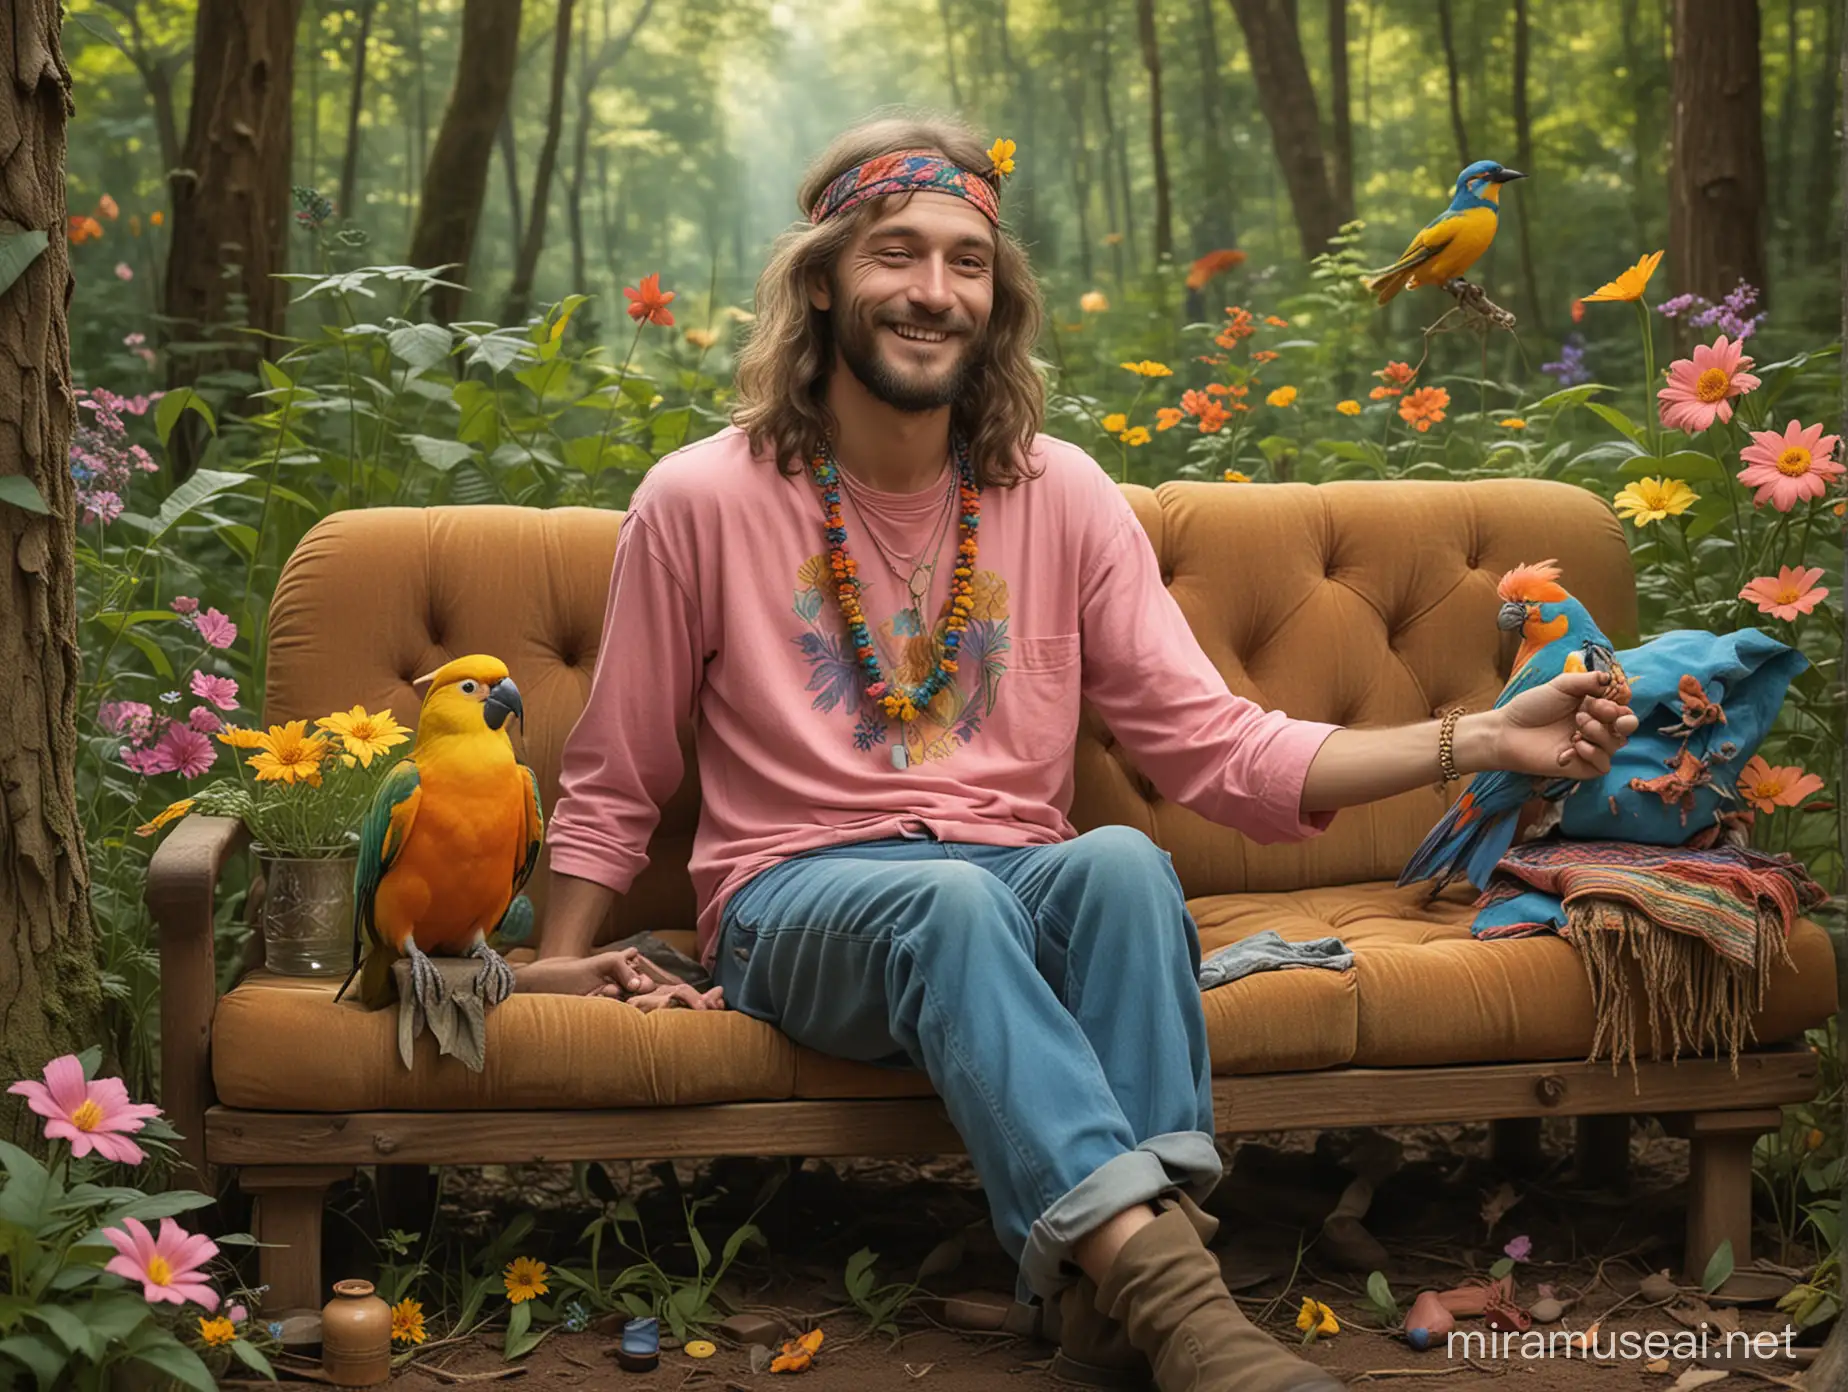 In the forest, there was a hippie man sitting on a sofa, smoking marijuana and smiling. Next to him was a vase with pink, yellow, and blue flowers. Around him were various animals, such as an orange bird buying a green shirt and a pink mechanic.